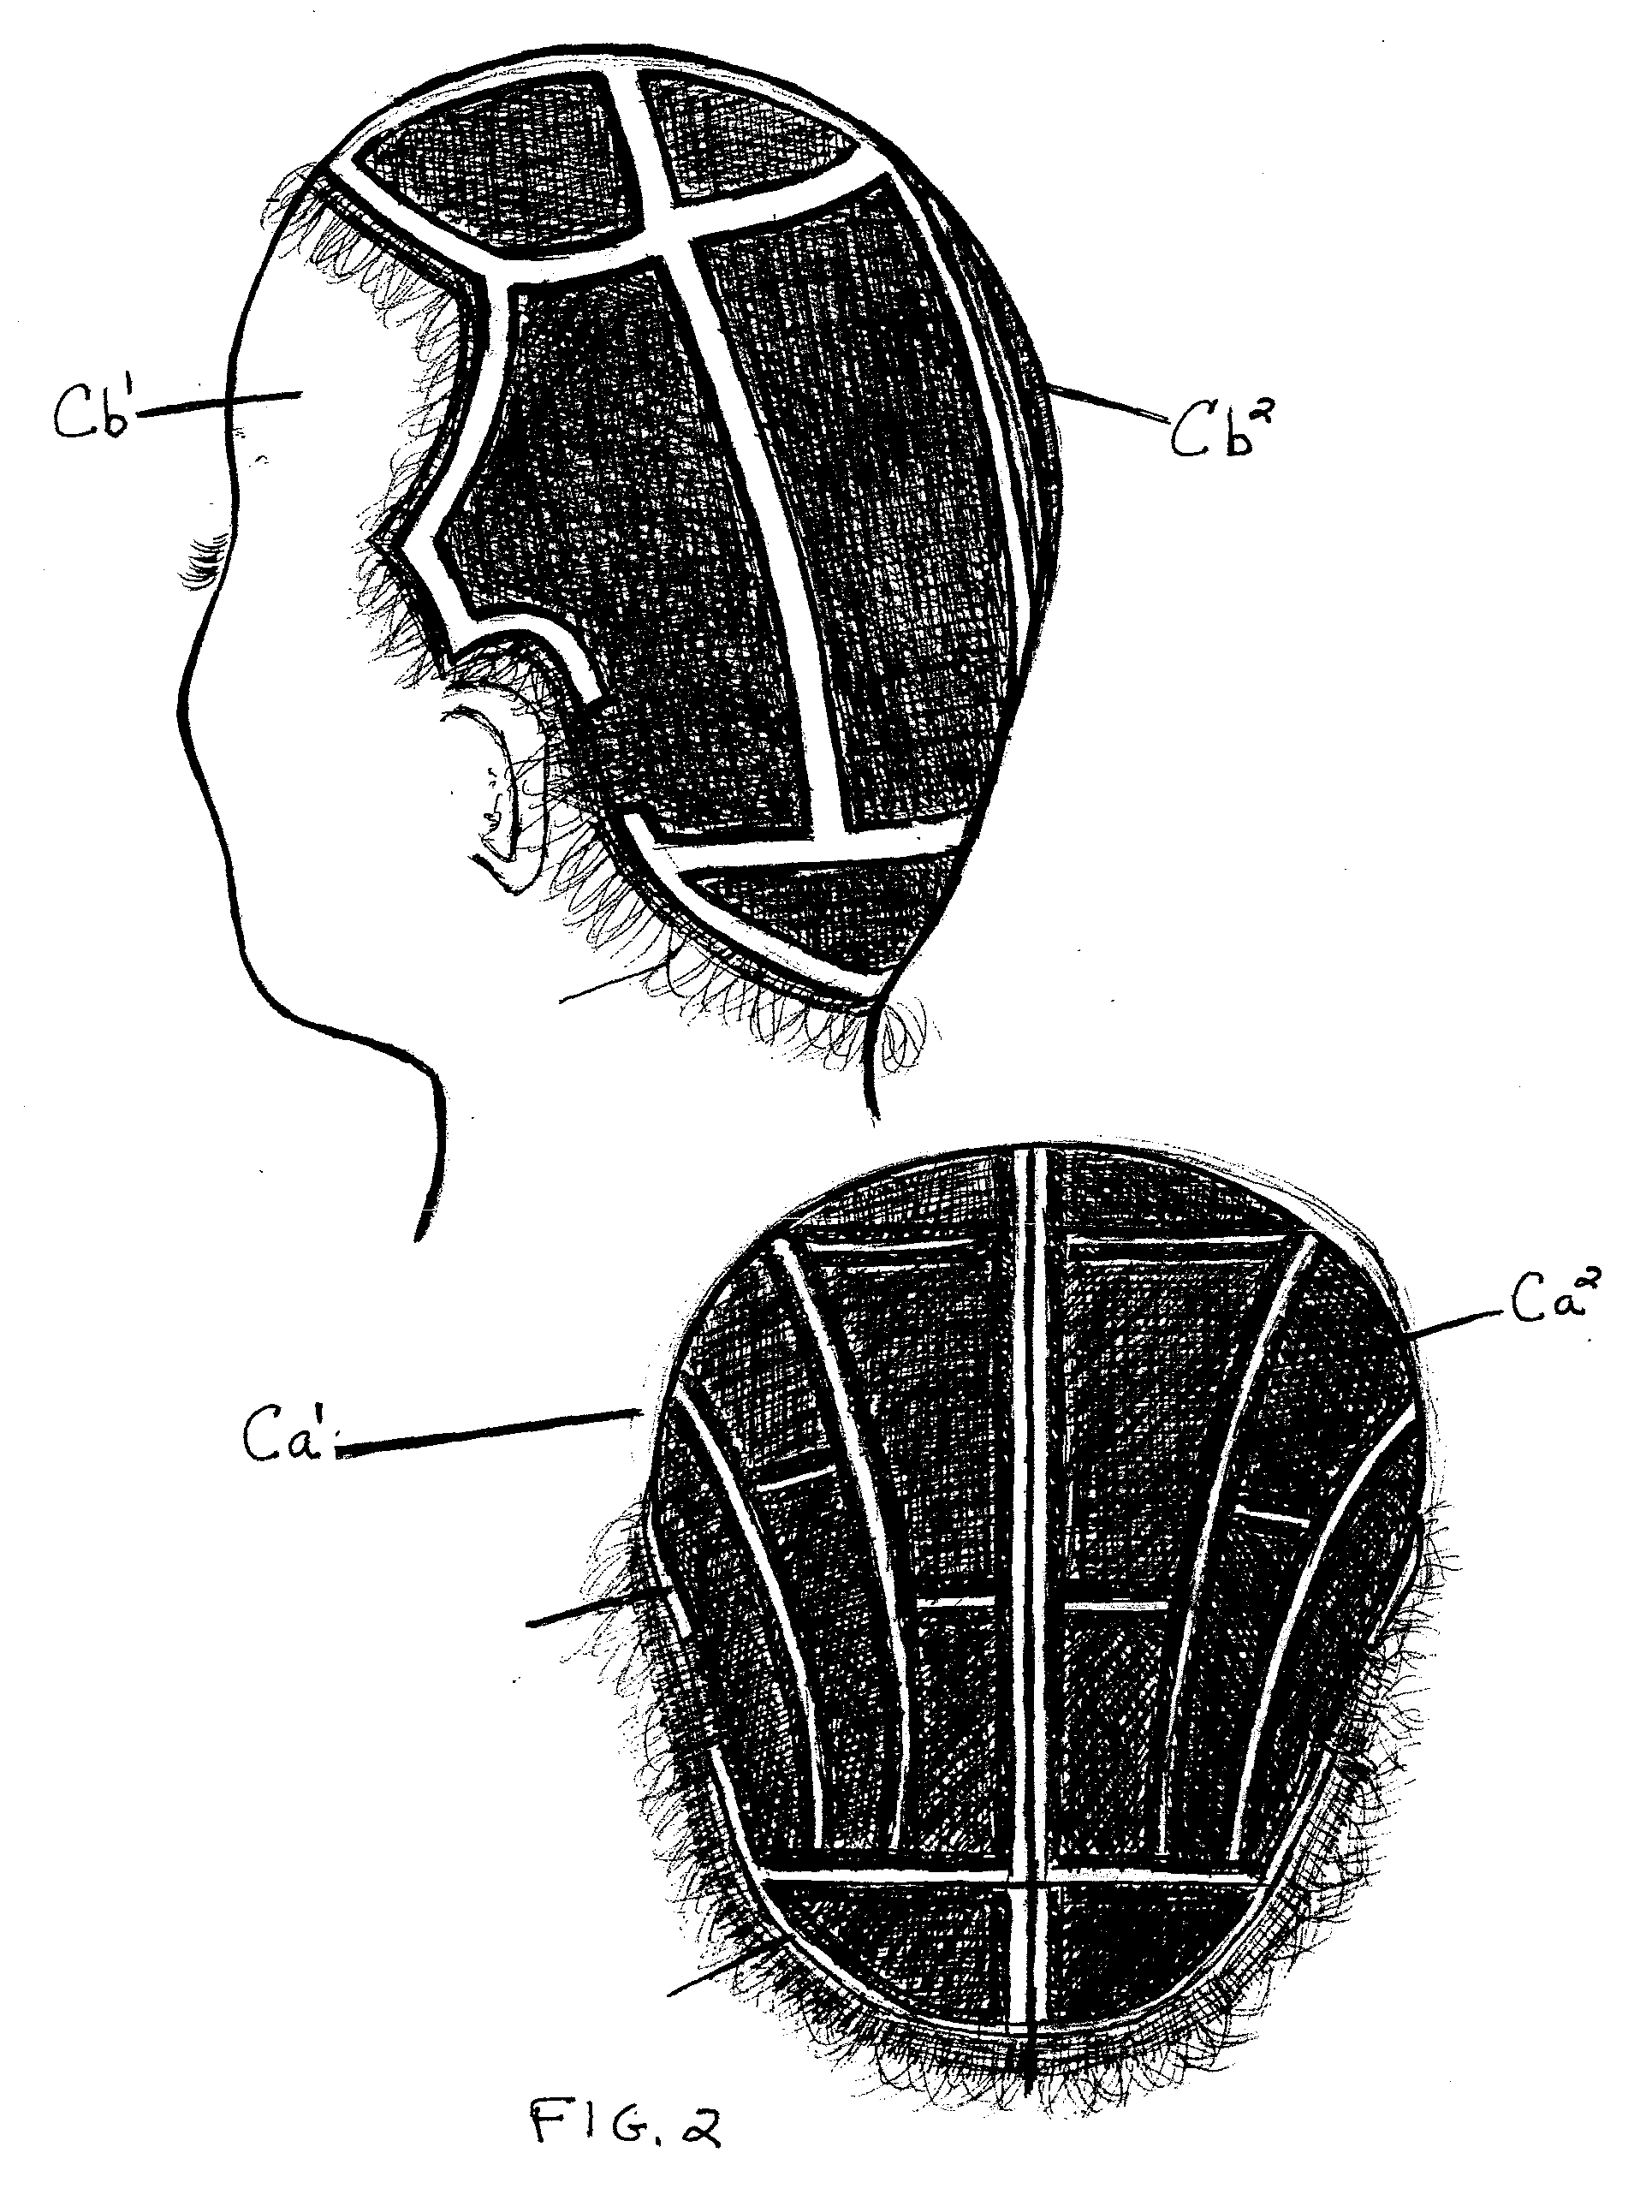 Interchangeable Wiglet with Anchor Cap Apparatus and Method